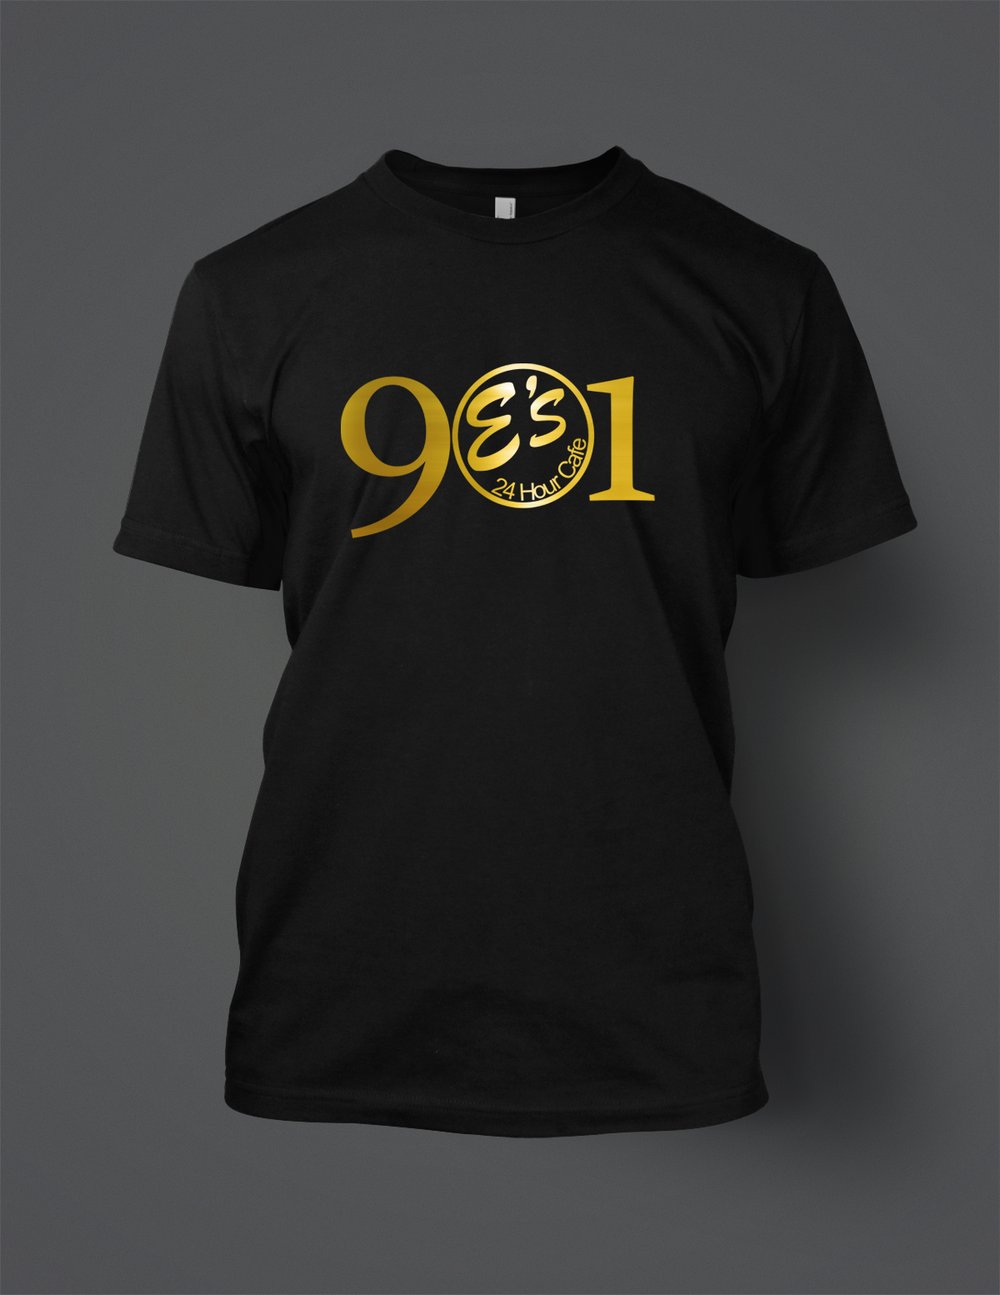 Image of Black and Gold E's 901 tee